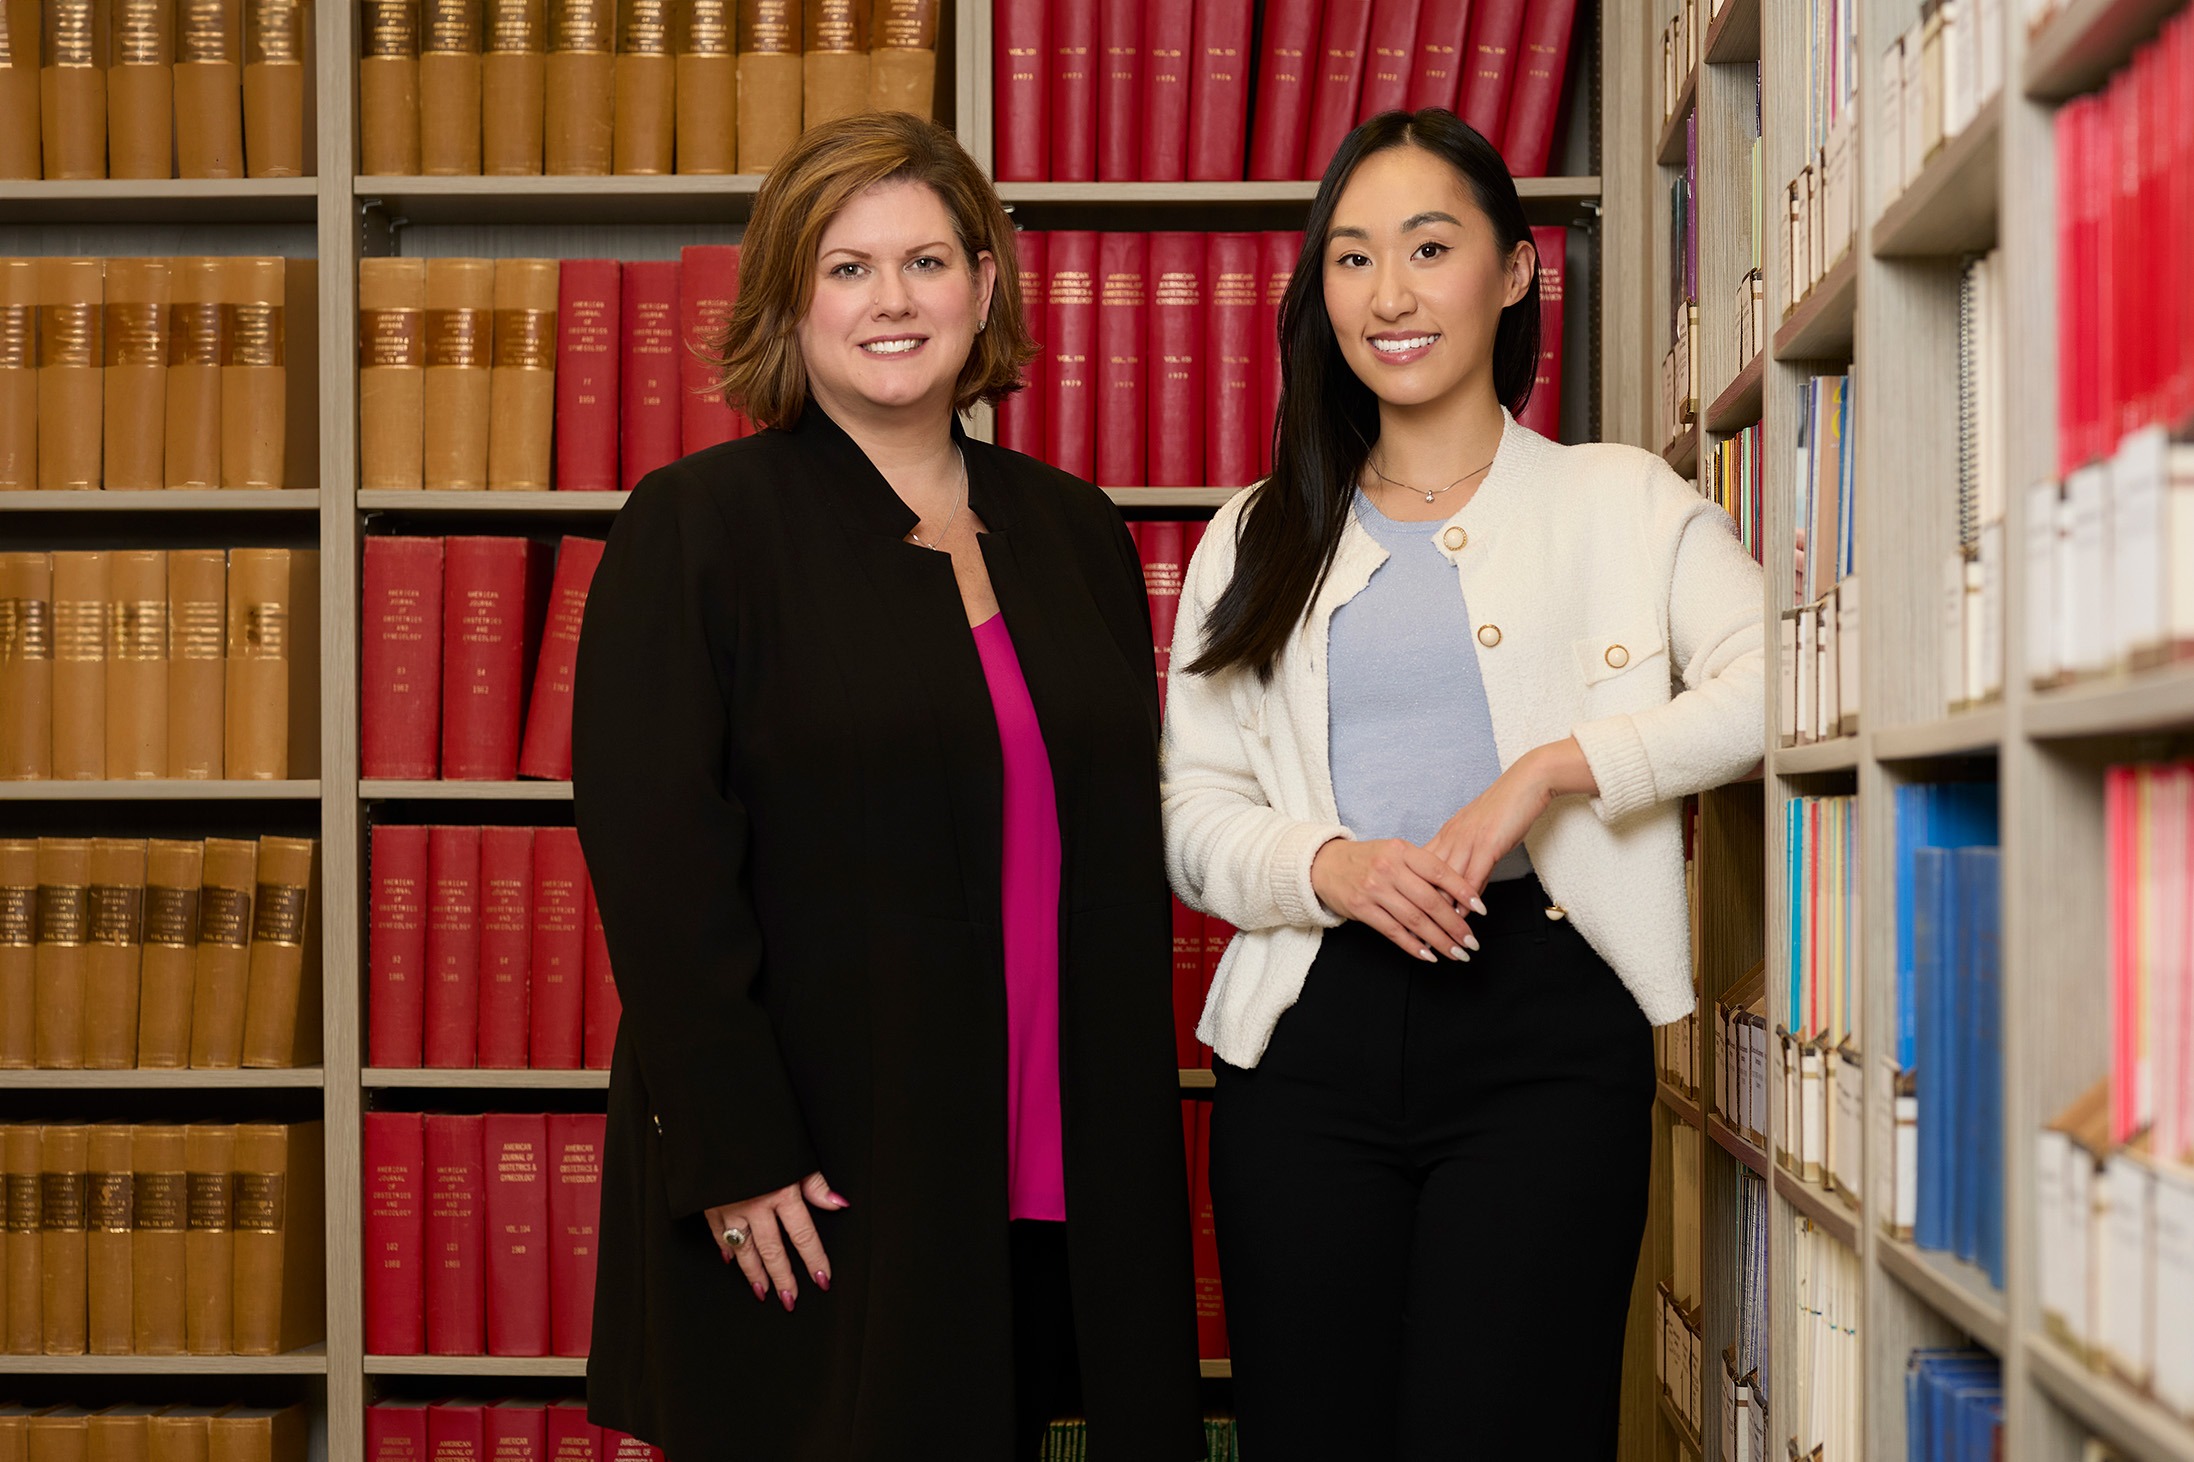 Amy Gleiser (left) and Sharon Tan (right) standing next to each other in library and smiling